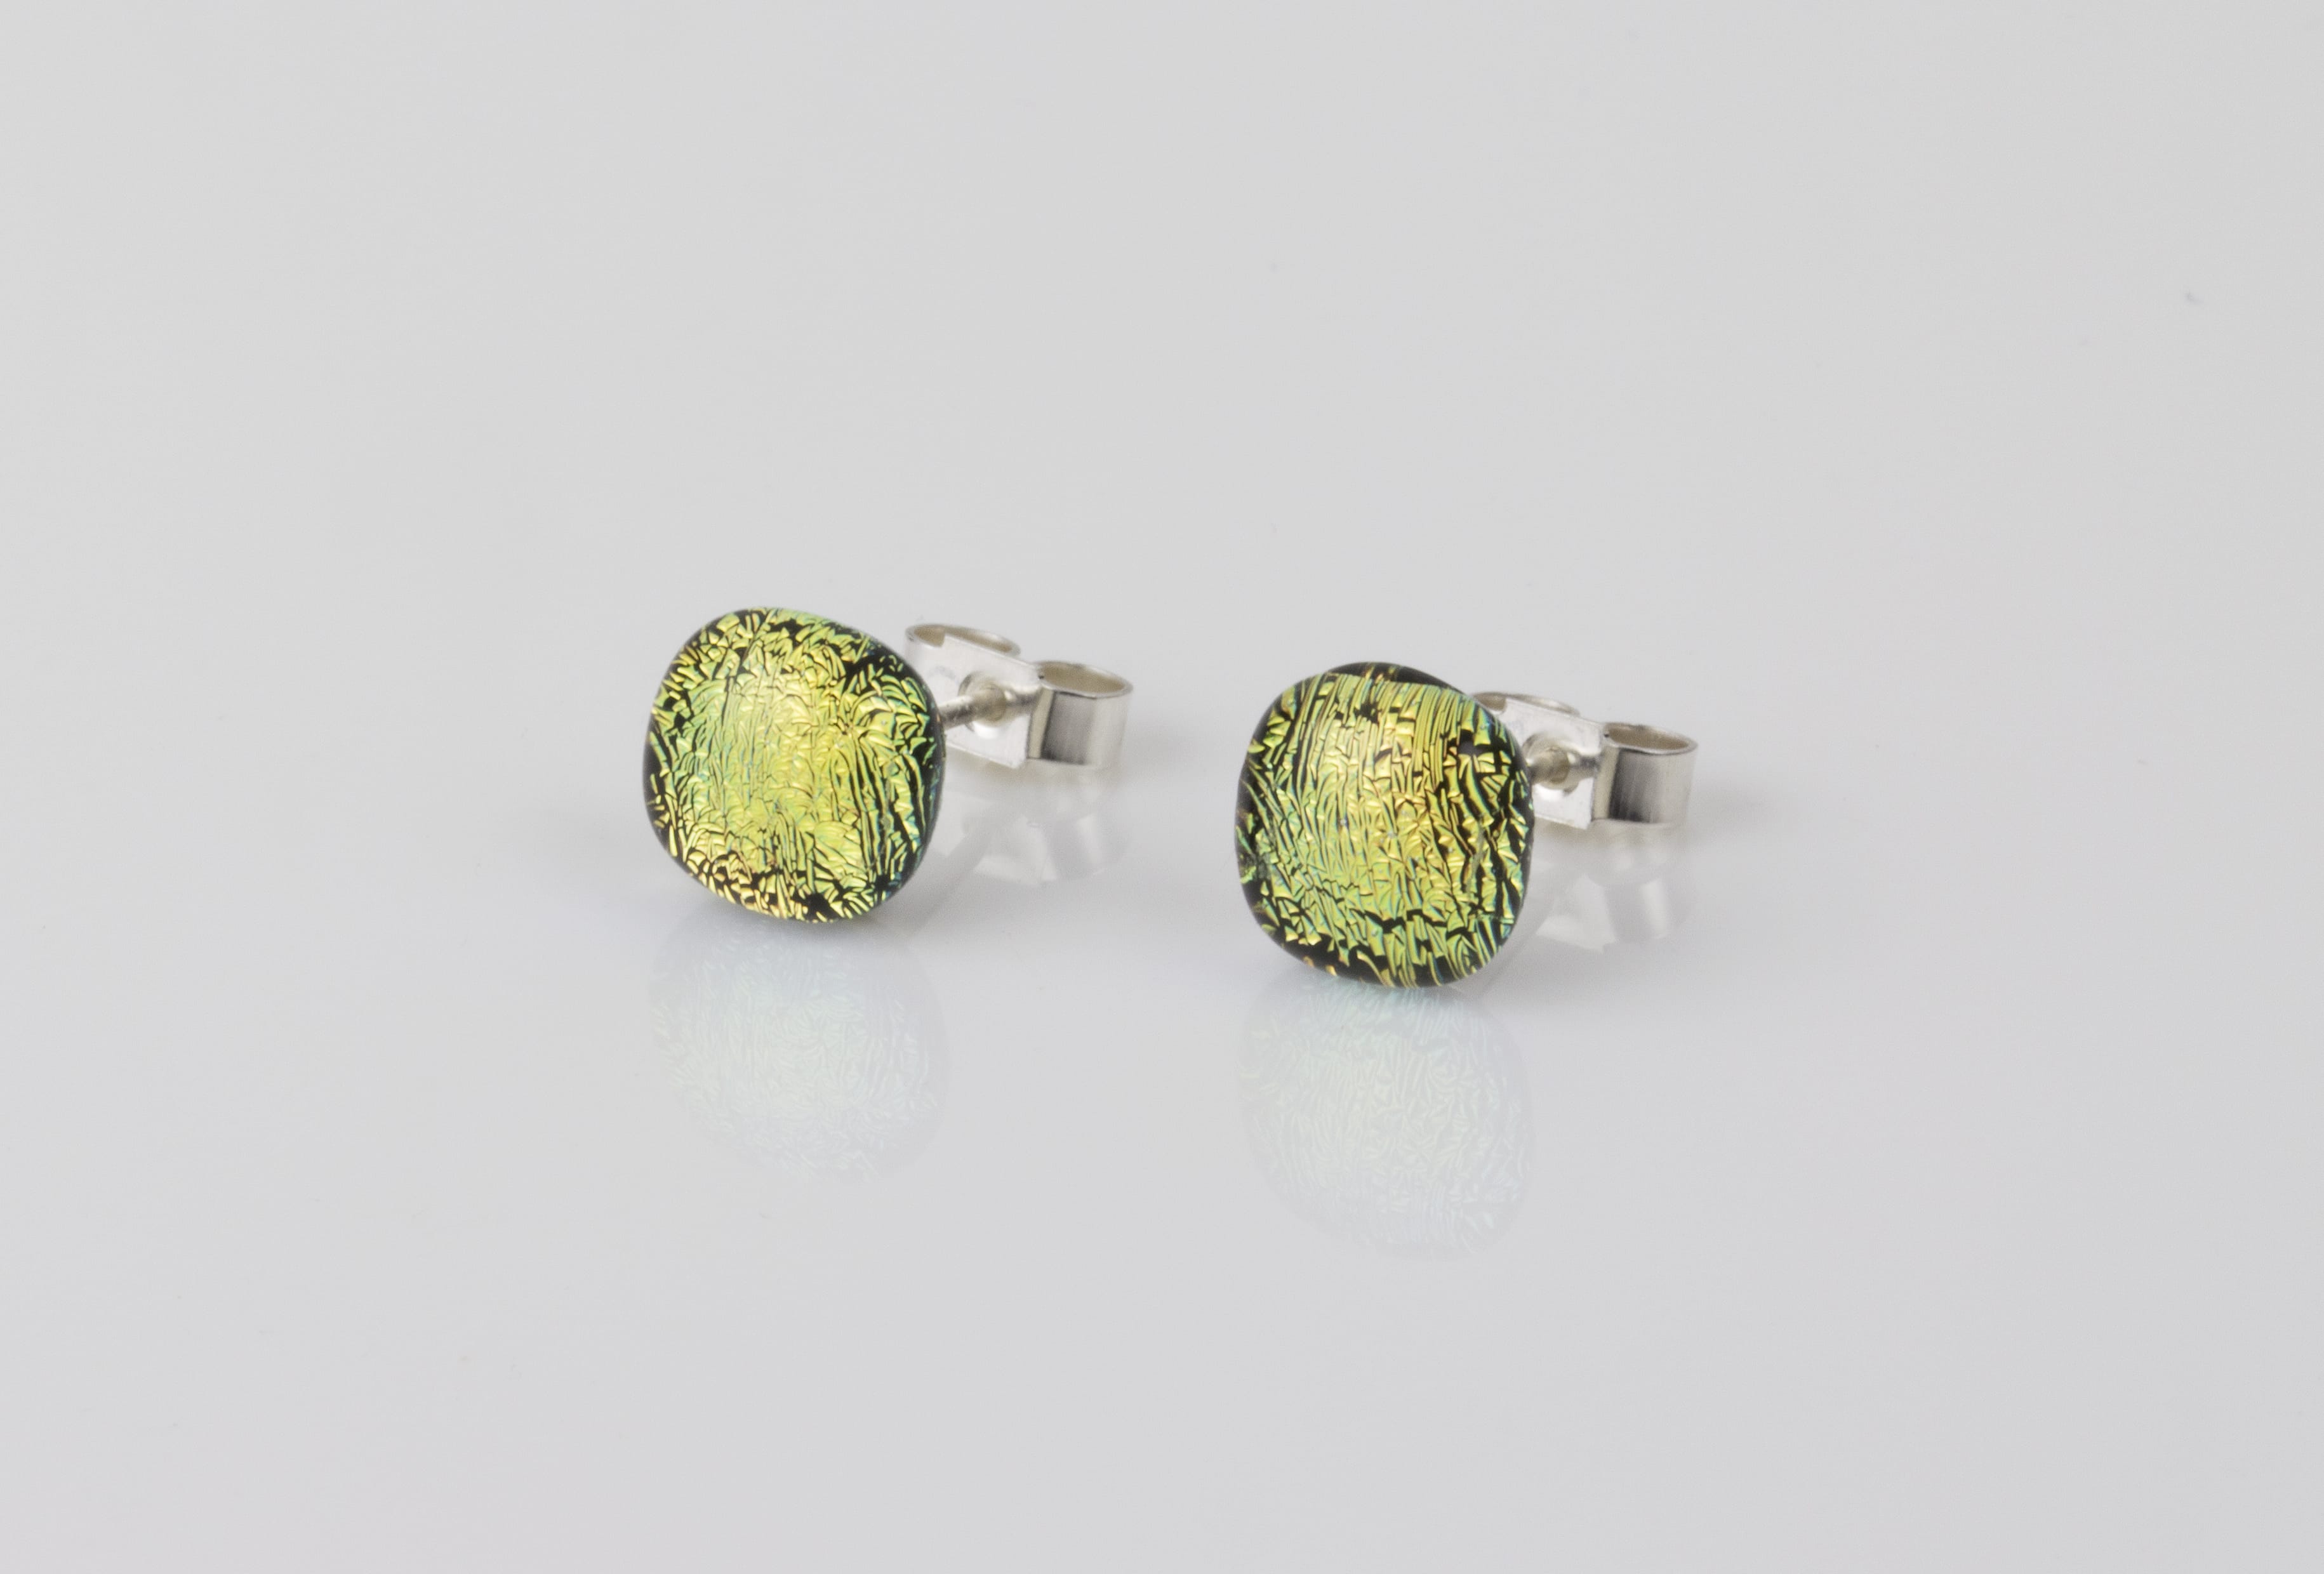 Dichroic glass jewellery uk, handmade stud earrings with salmon dichroic glass, round, sterling glass 7-9mm, silver posts.